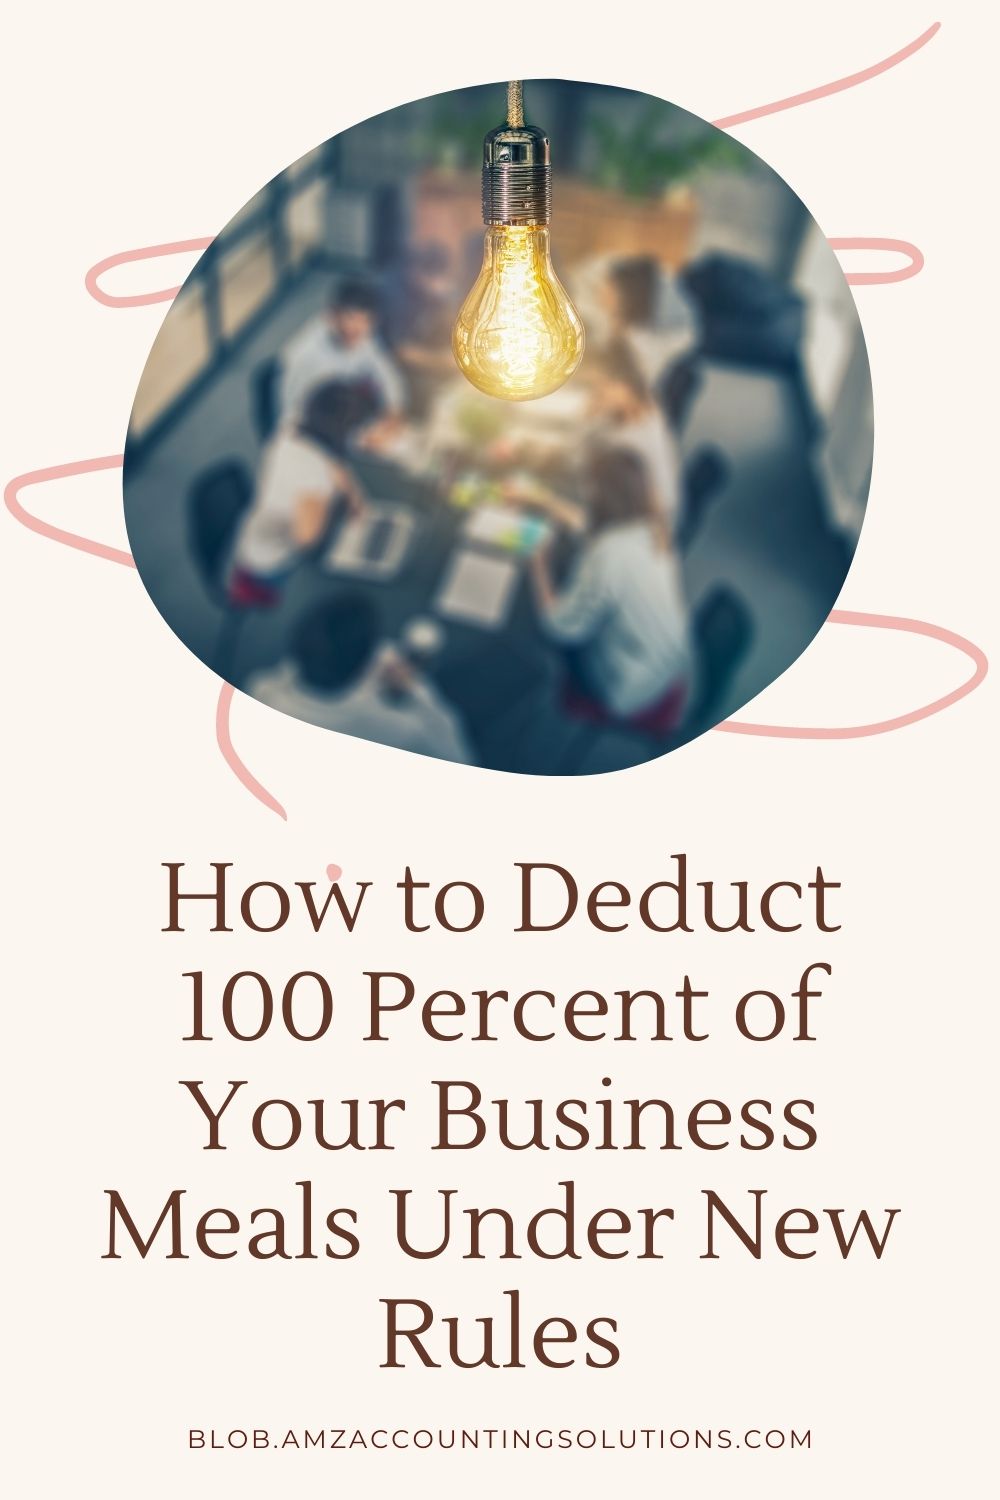 How to Deduct 100 Percent of Your Business Meals Under New Rules AMZ Blog